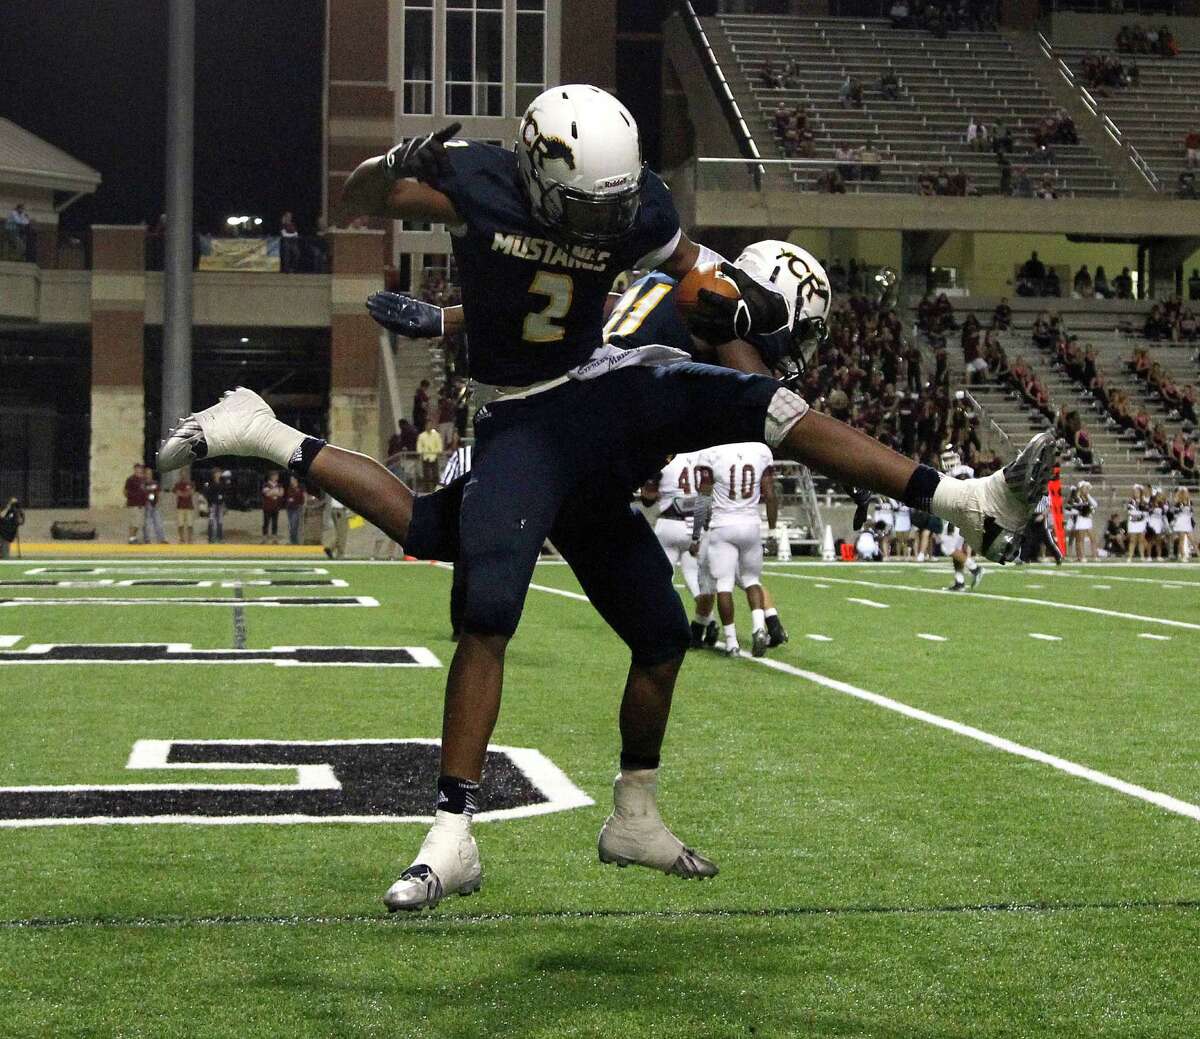 Cy Ranch's RJ Sneed II (2) celebrates one of his touchdowns during the second half of action between Cy-Fair and Cy Ranch high schools during a football game at the Berry Center, Thursday, Oct. 30, 2014, in Houston. Cy Ranch won the game 38-21.